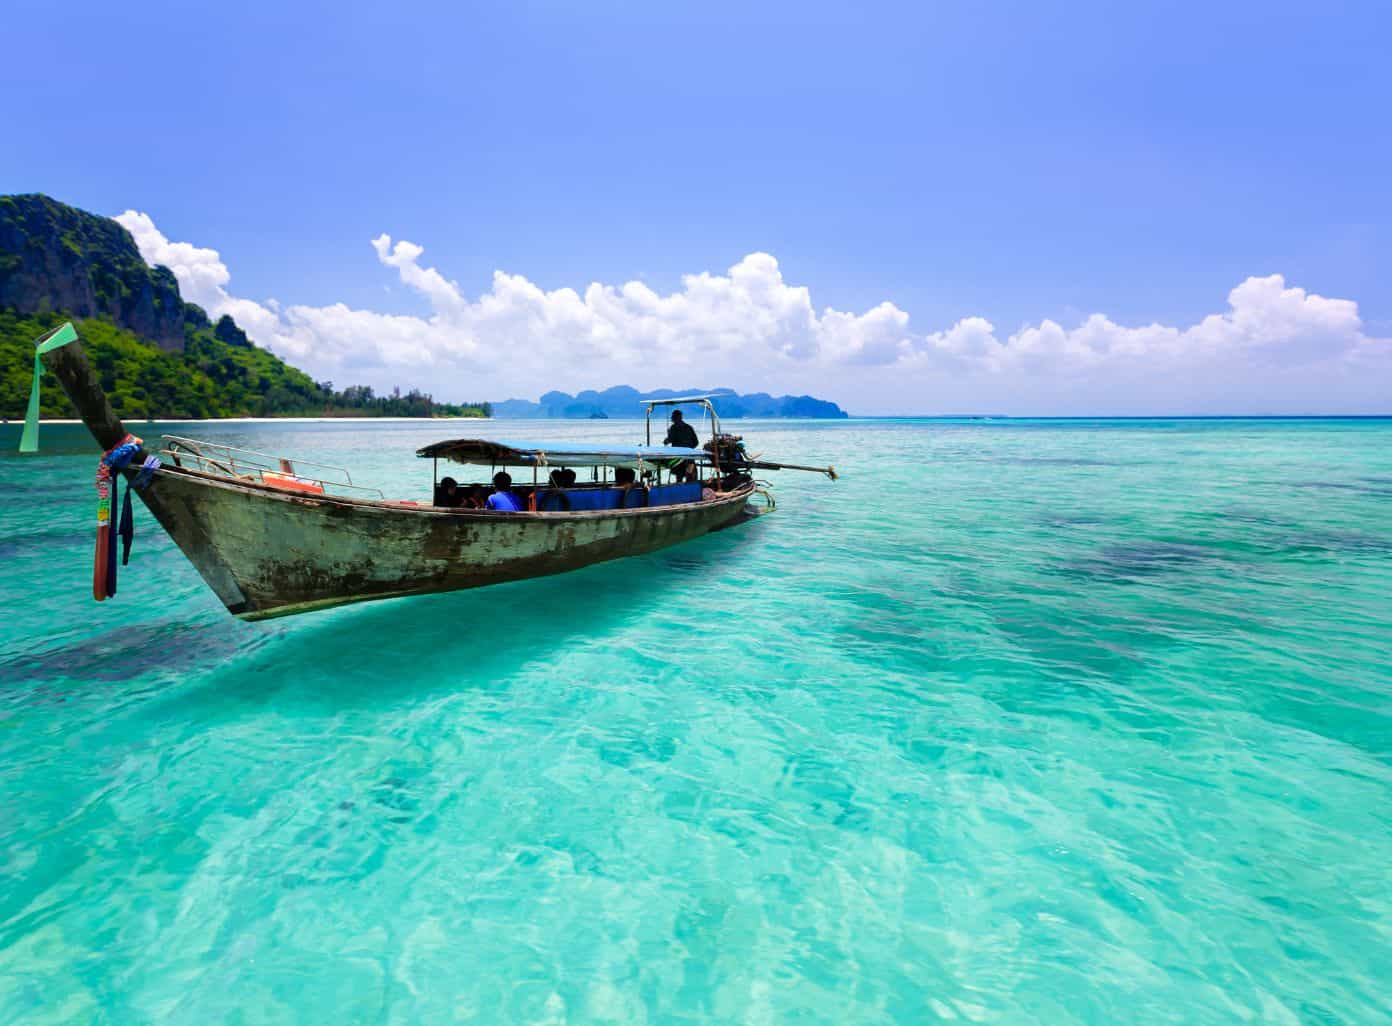 Must-See Attractions in Krabi, Thailand